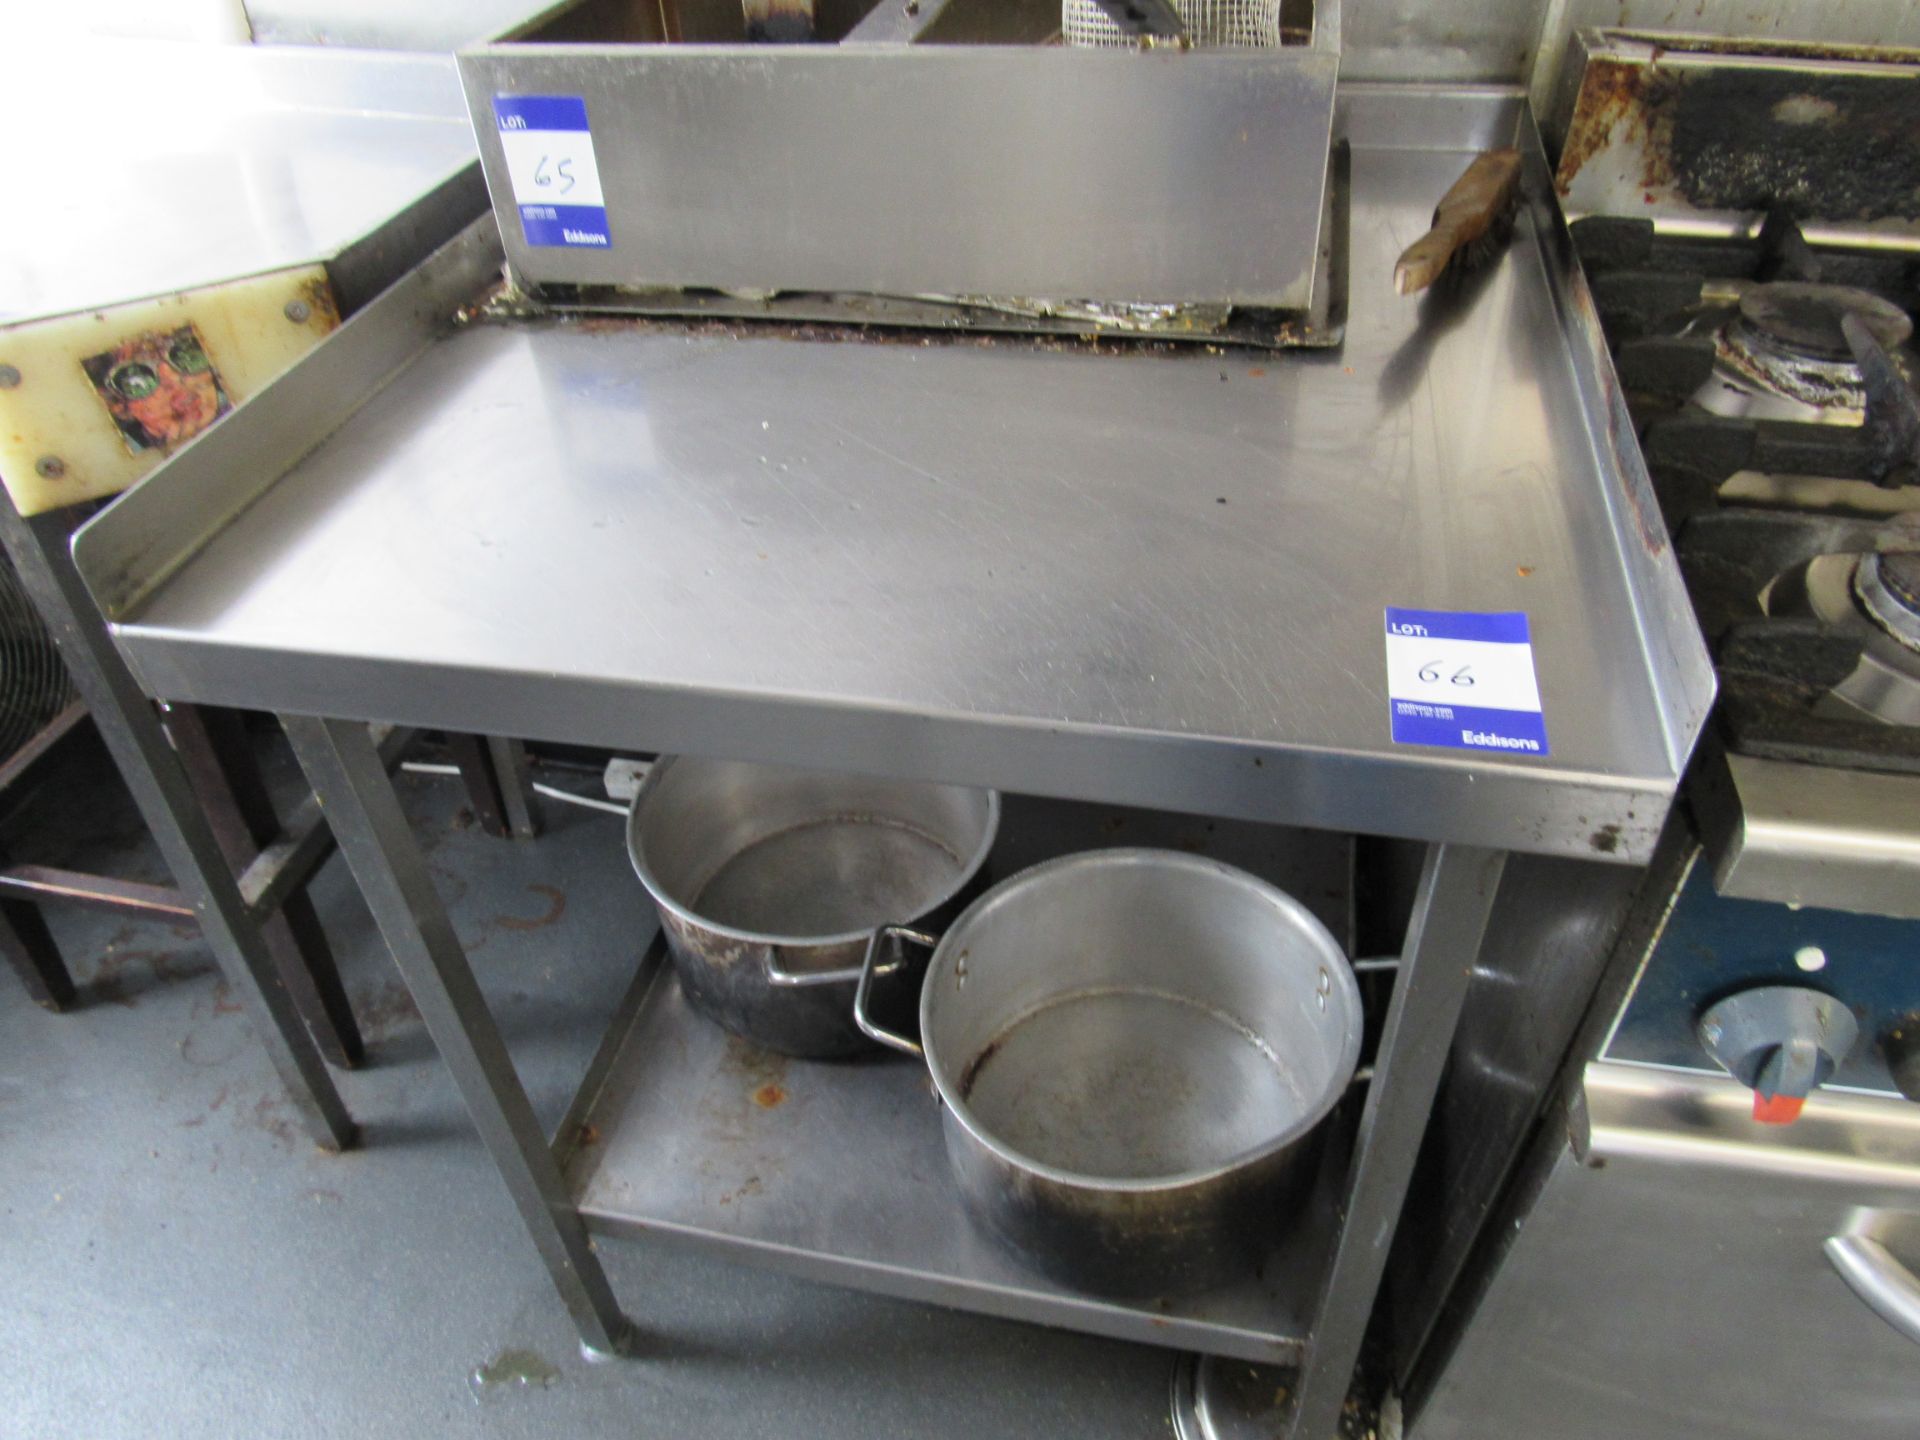 Stainless steel appliance stand